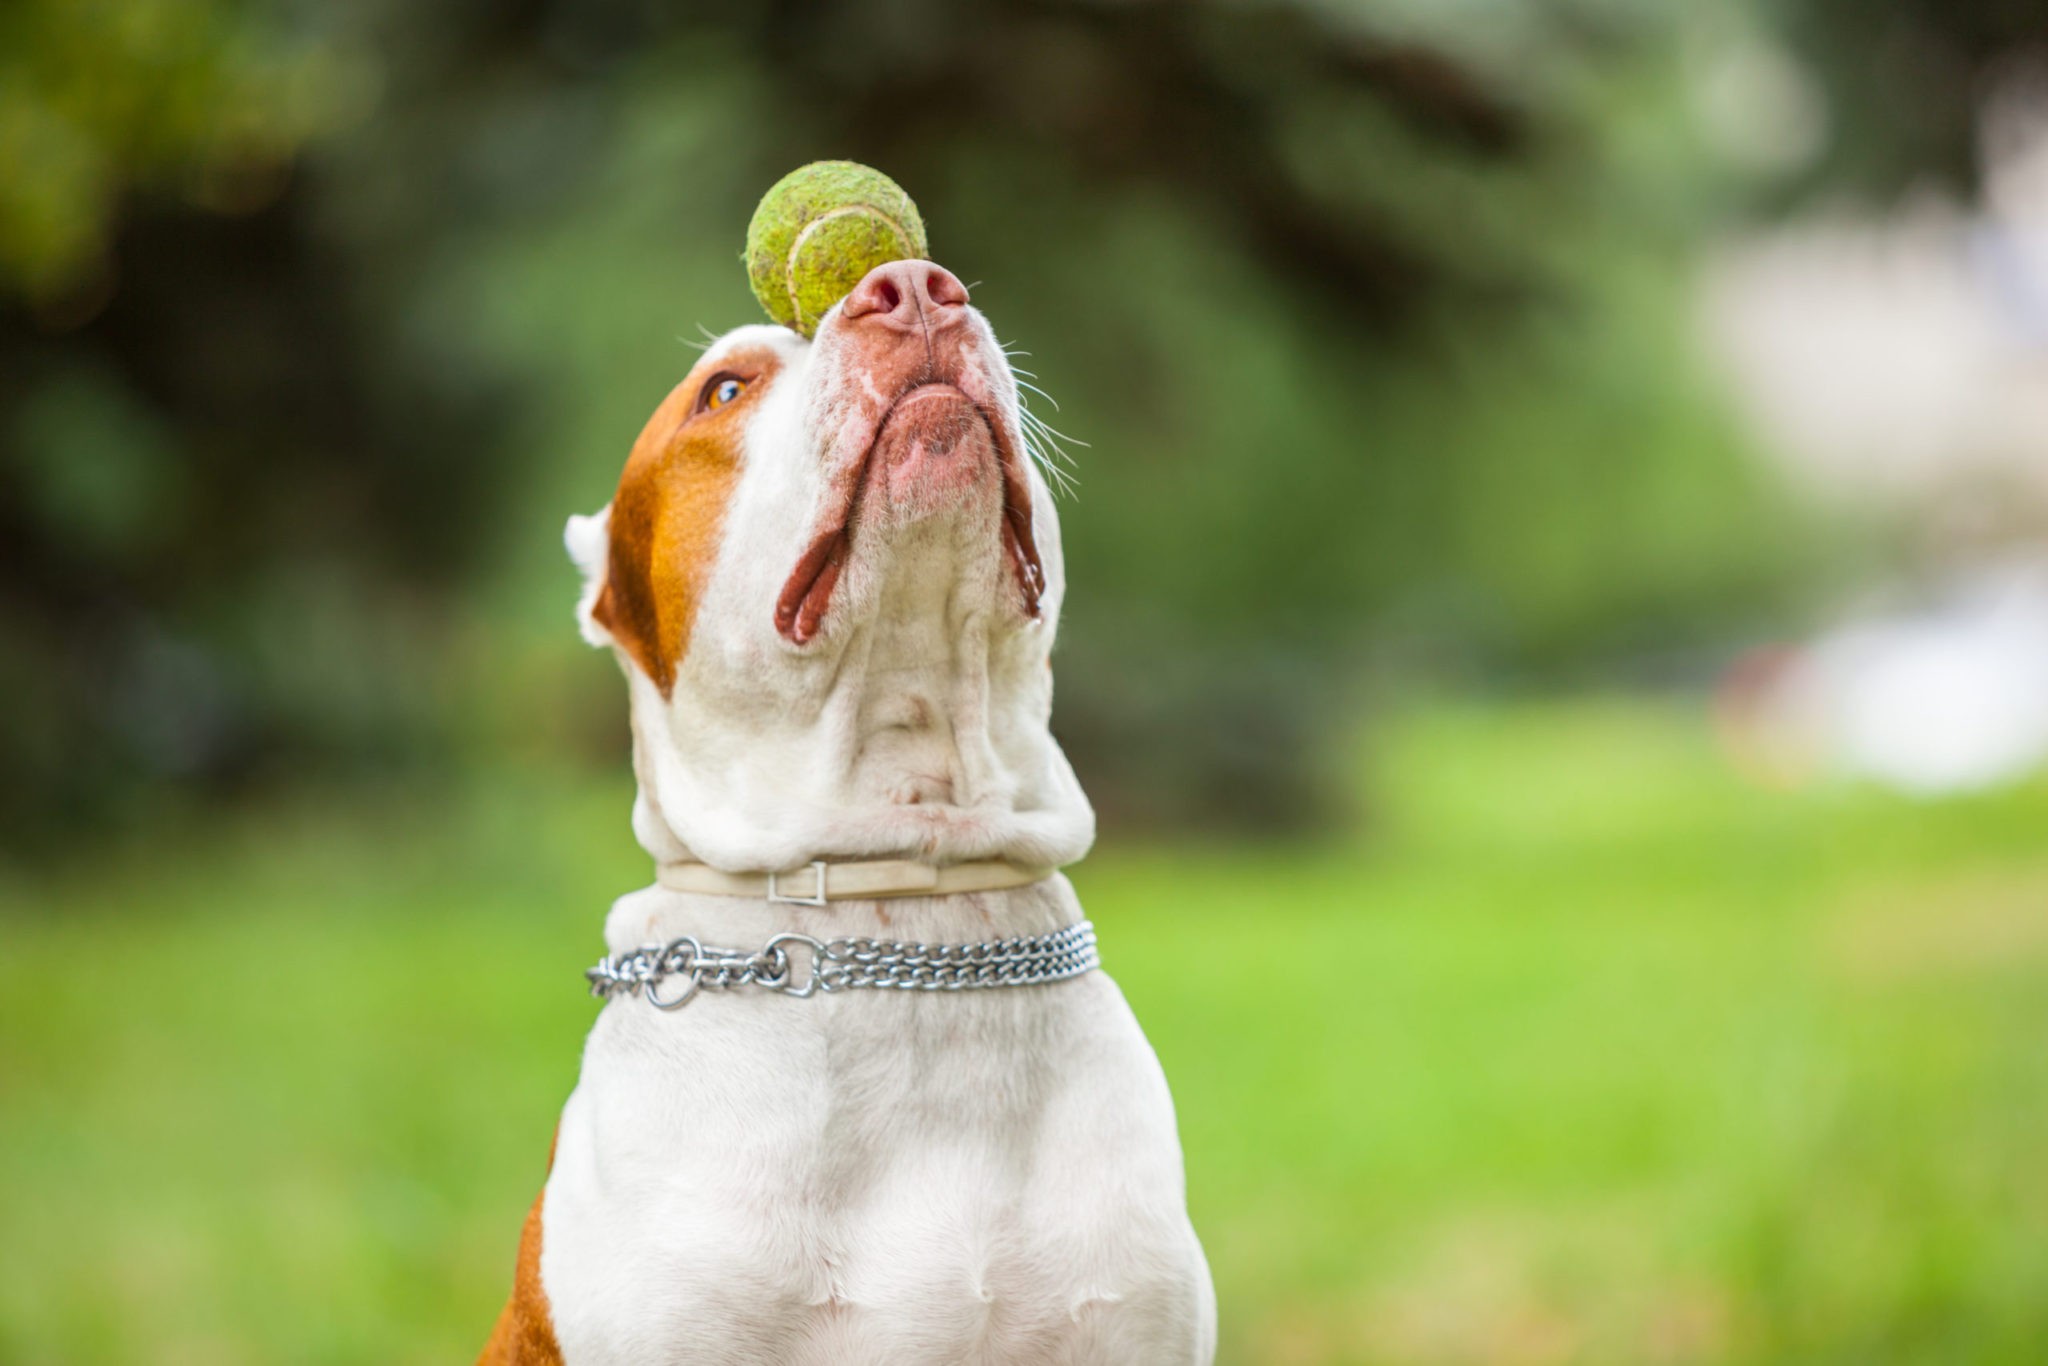 7 Best Dog Ball Launcher Of 2021 | Automatic Tennis Throwers